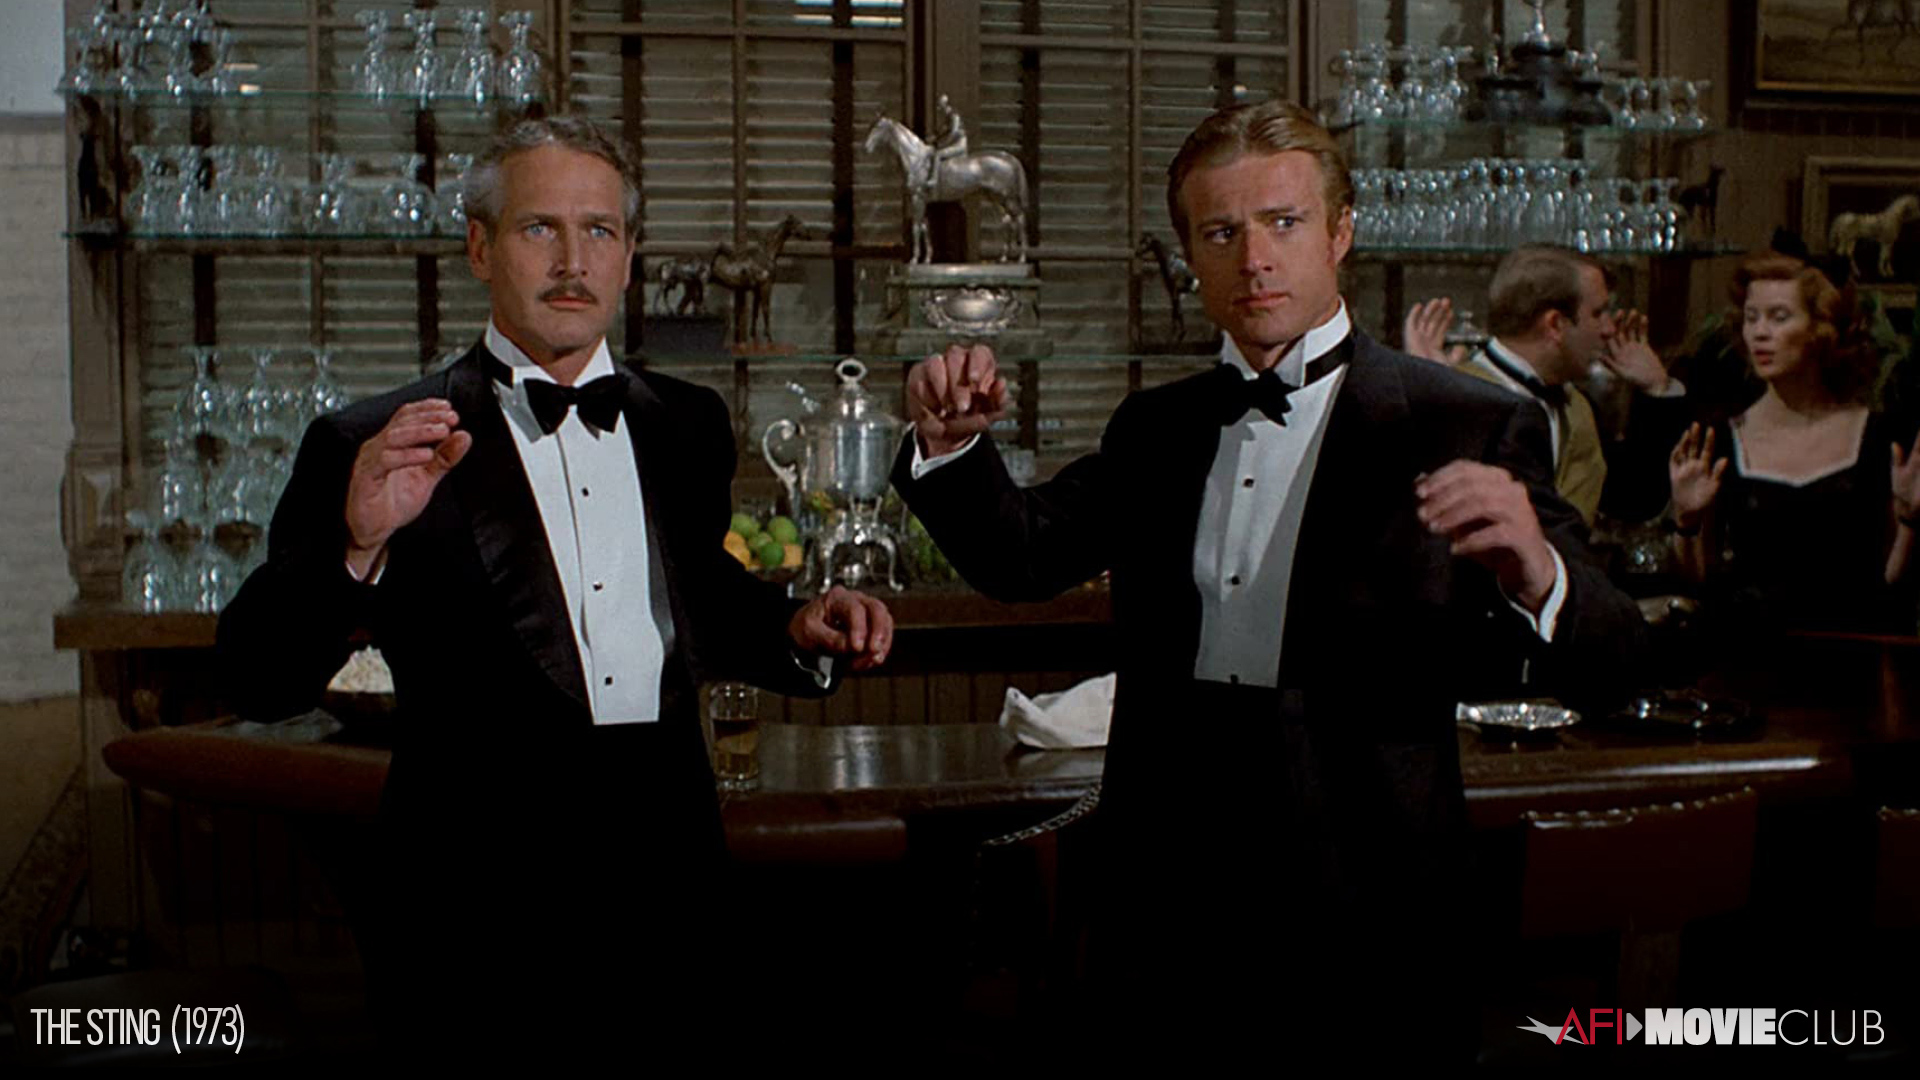 The Sting Film Still - Paul Newman and Robert Redford